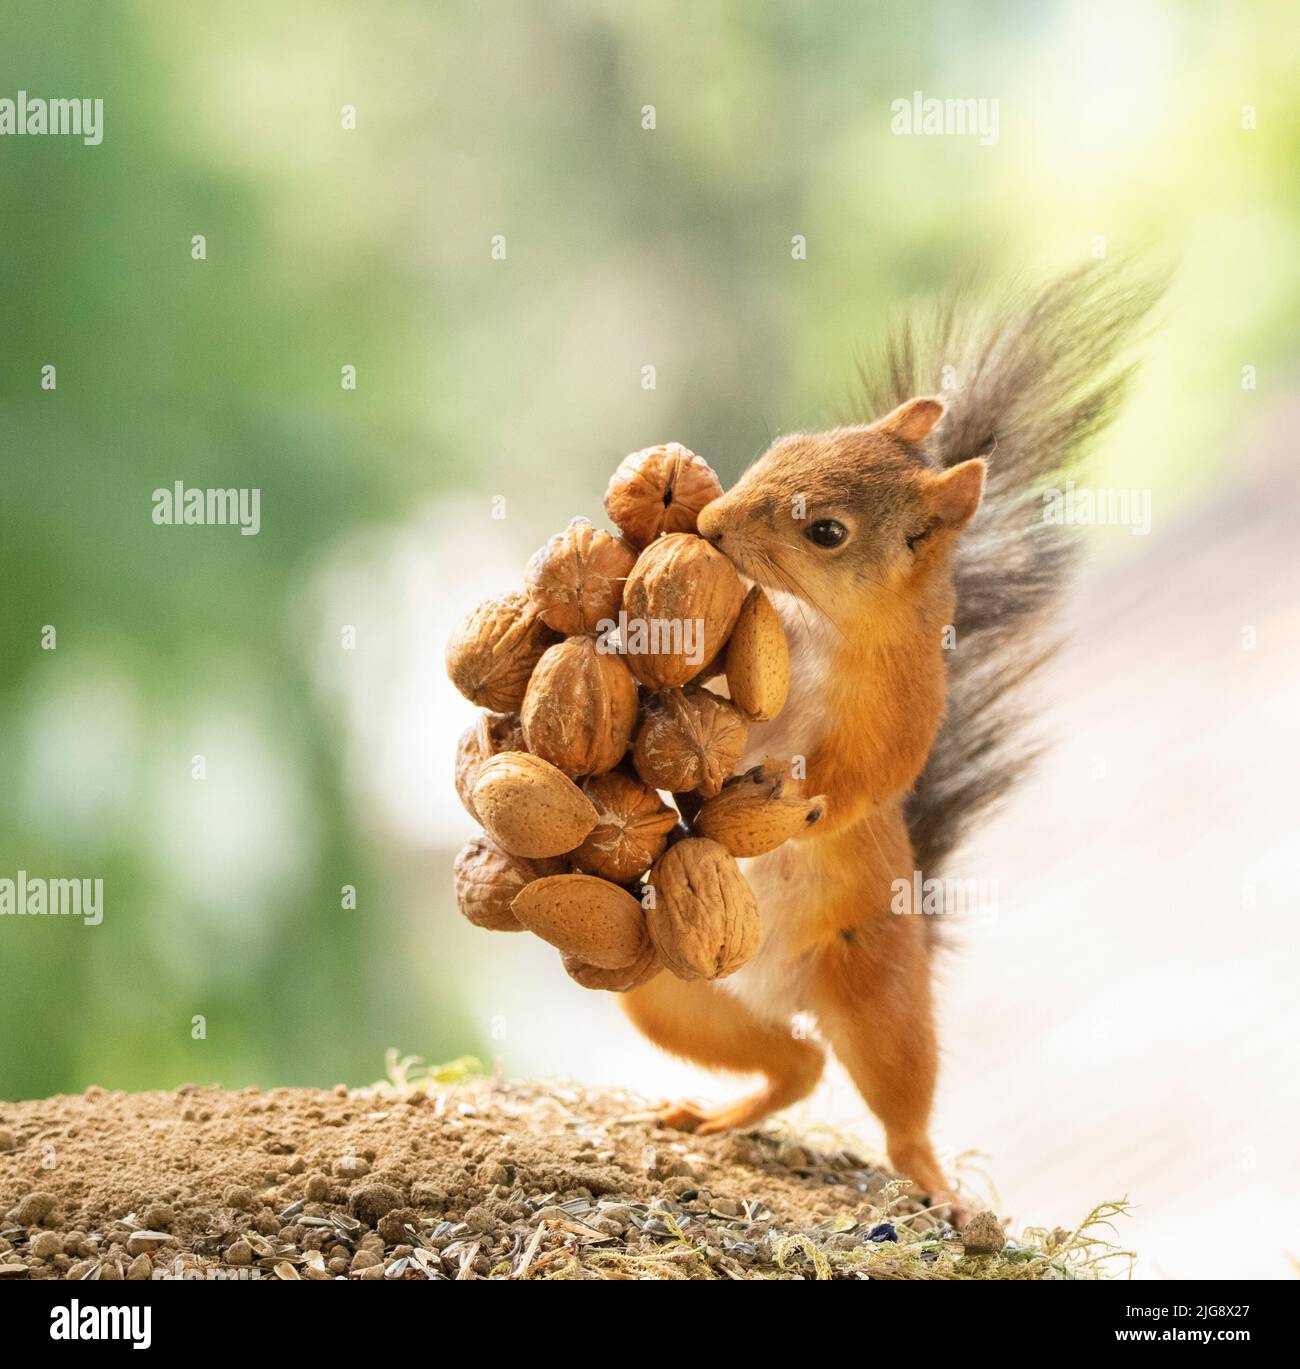 Squirrel and nuts images